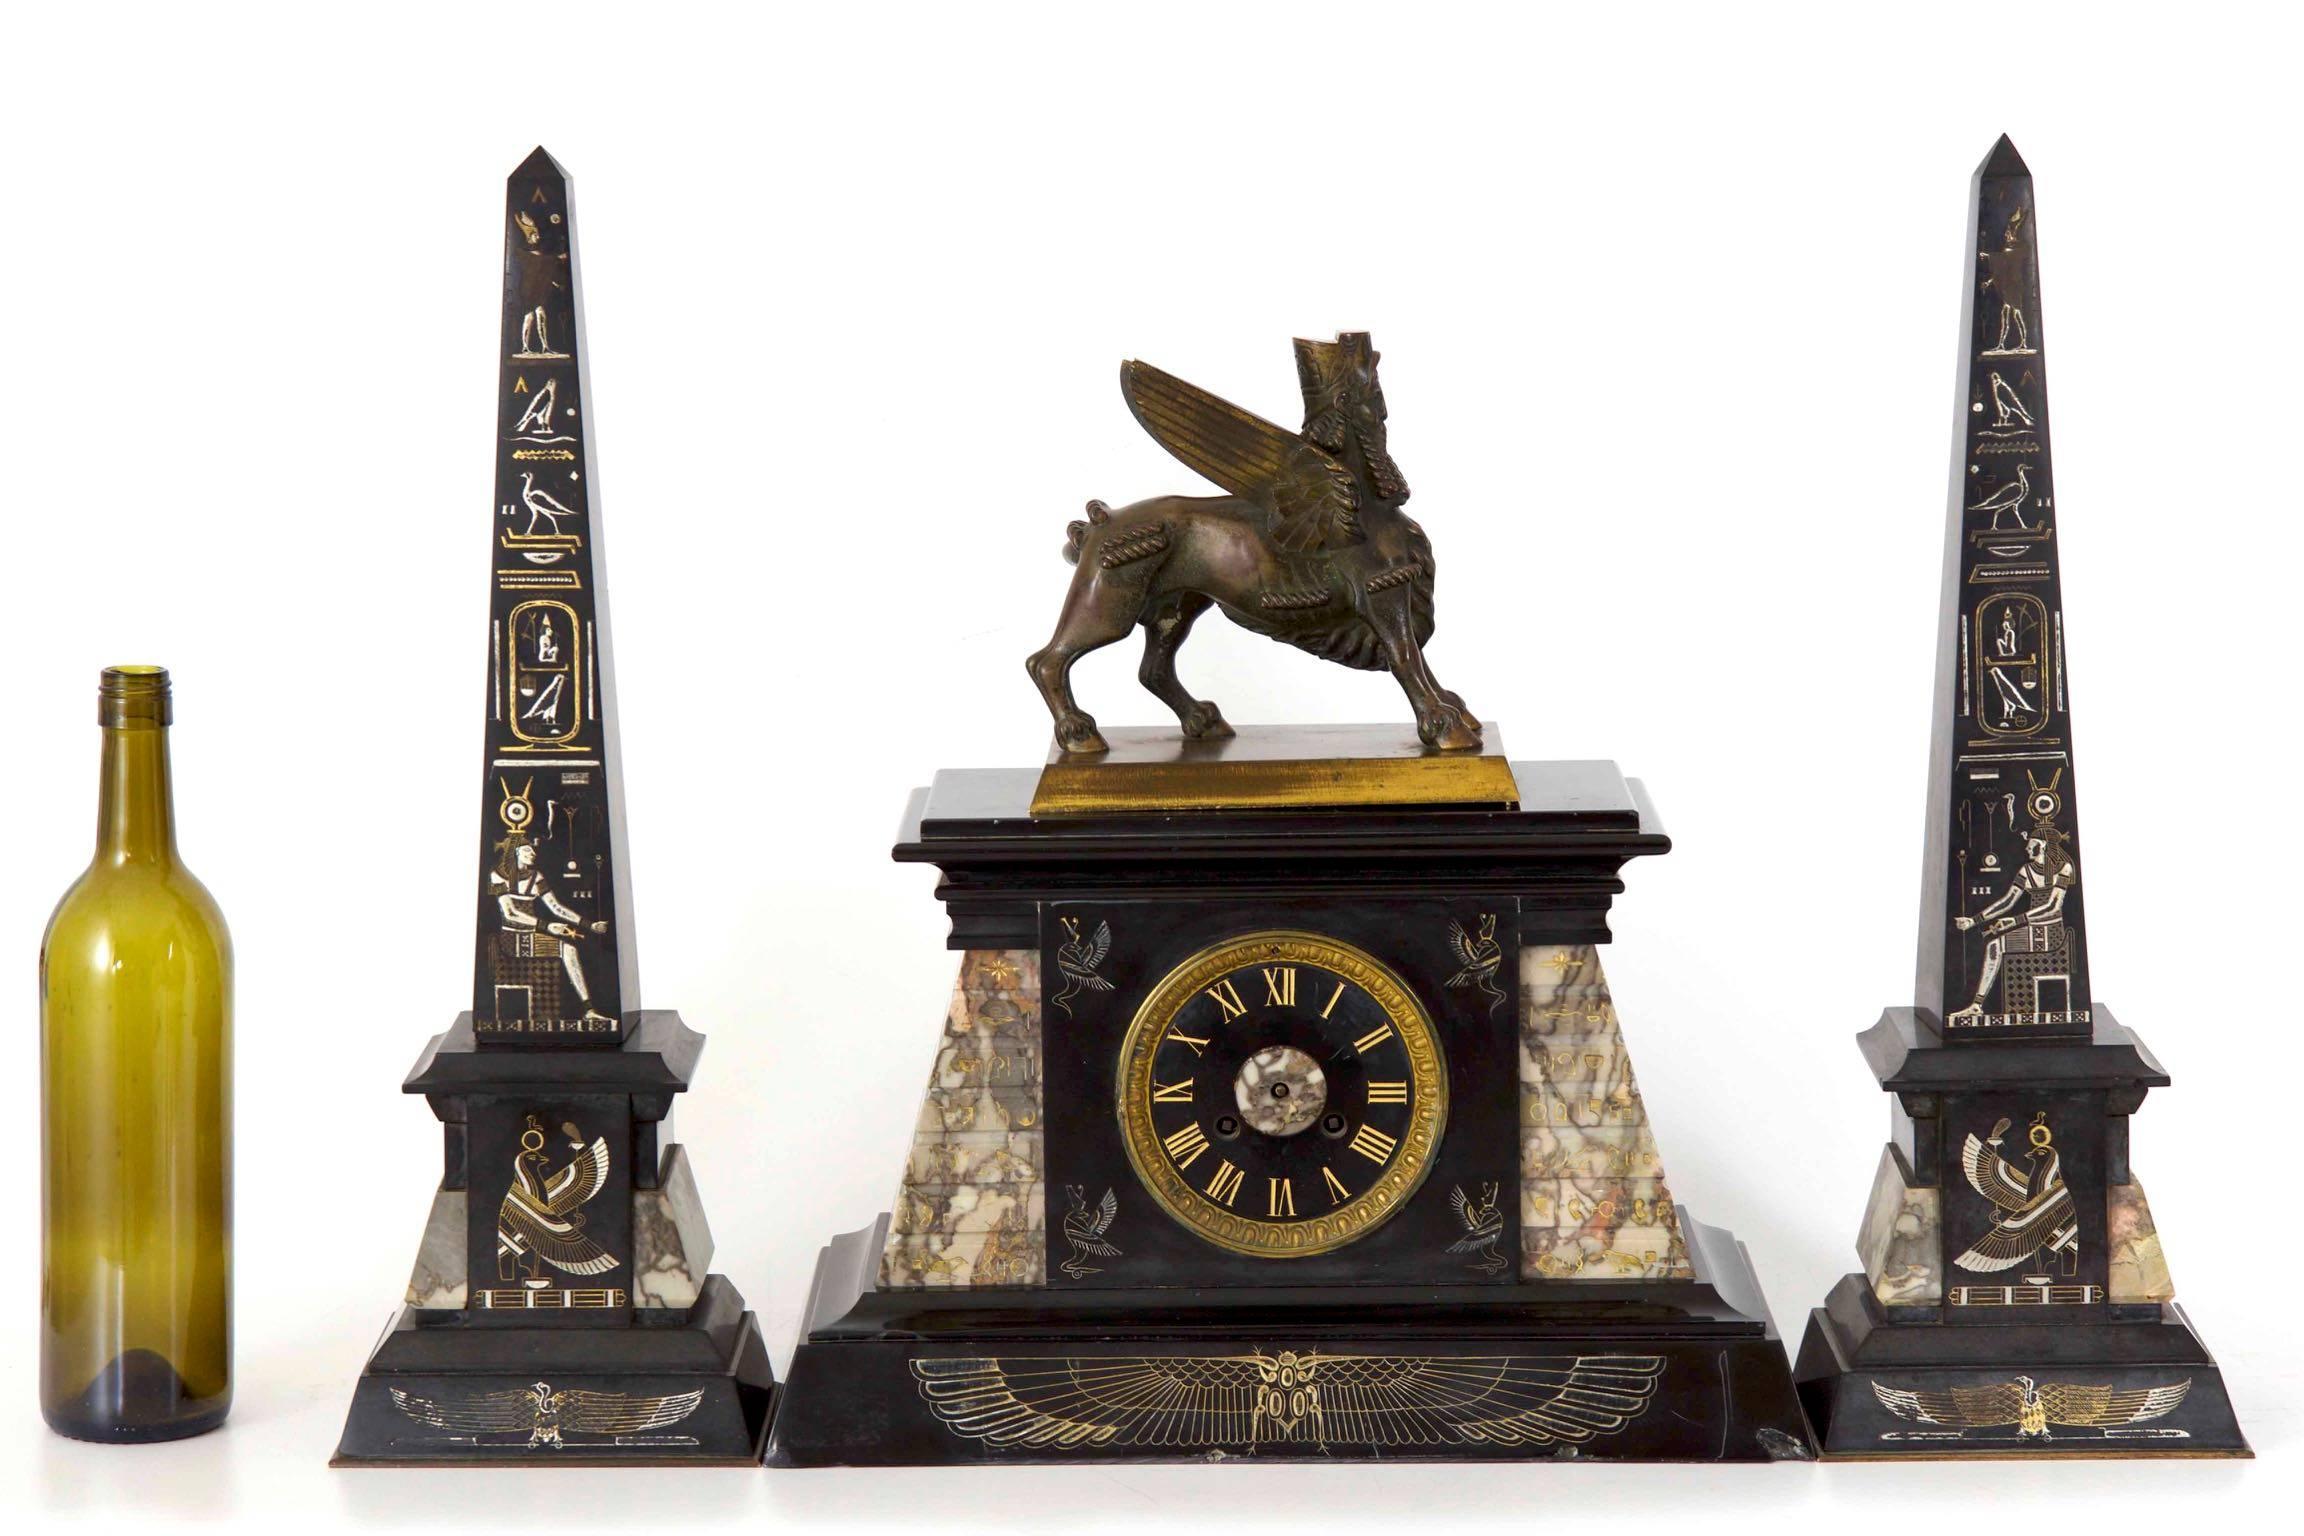 A powerful expression of the cultural curiosity in the mysteries and discoveries of ancient Egypt during the late 19th century, this very finely decorated clock is incised with a full array of hieroglyphics and Egyptian motif. The mantel clock is